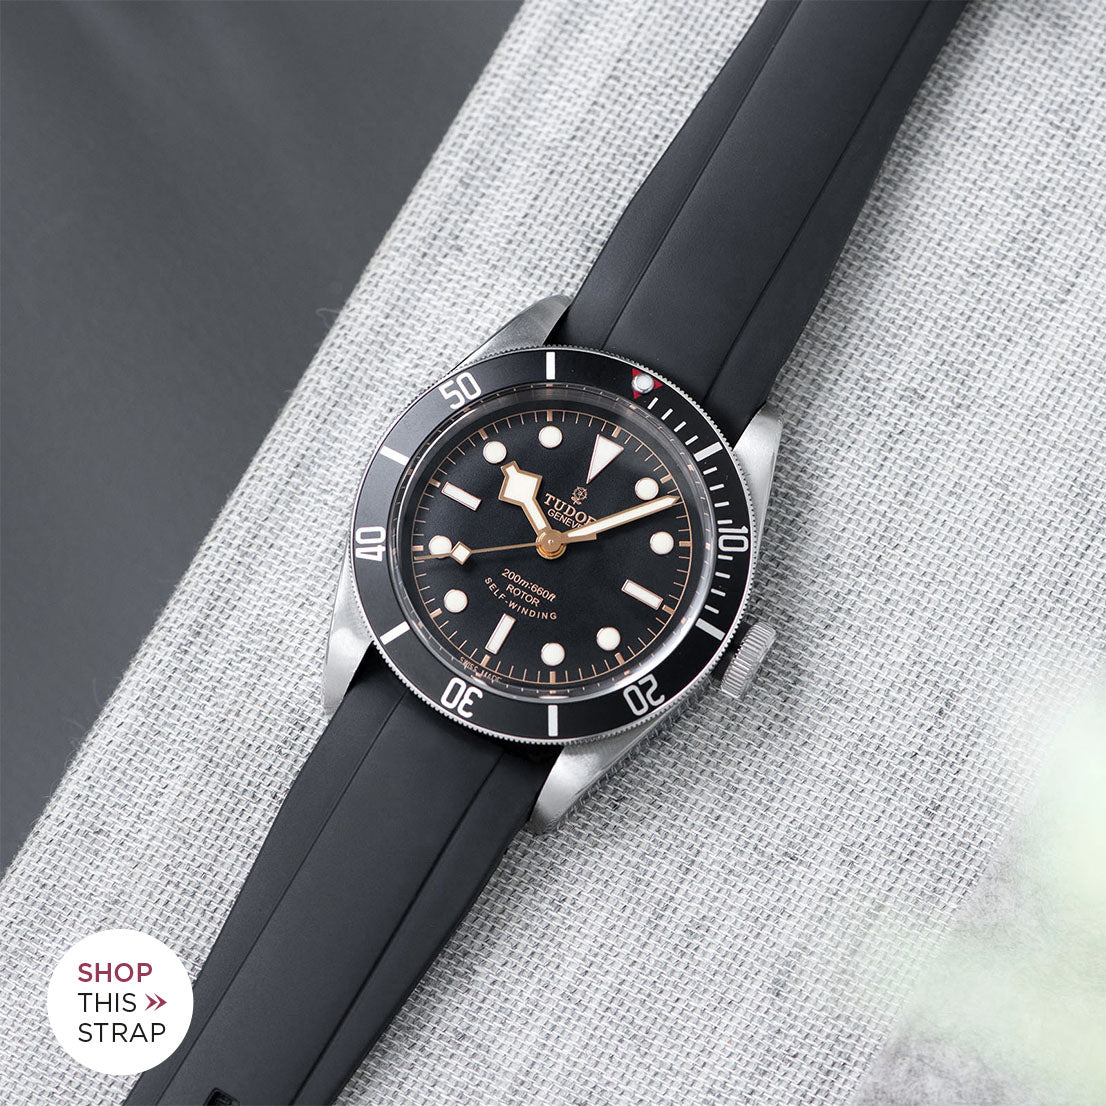 Bulang and Sons_Strap Guide_The Tudor Black Bay Black 79220N_Everest Curved End Black Rubber Strap With Tang Buckle 